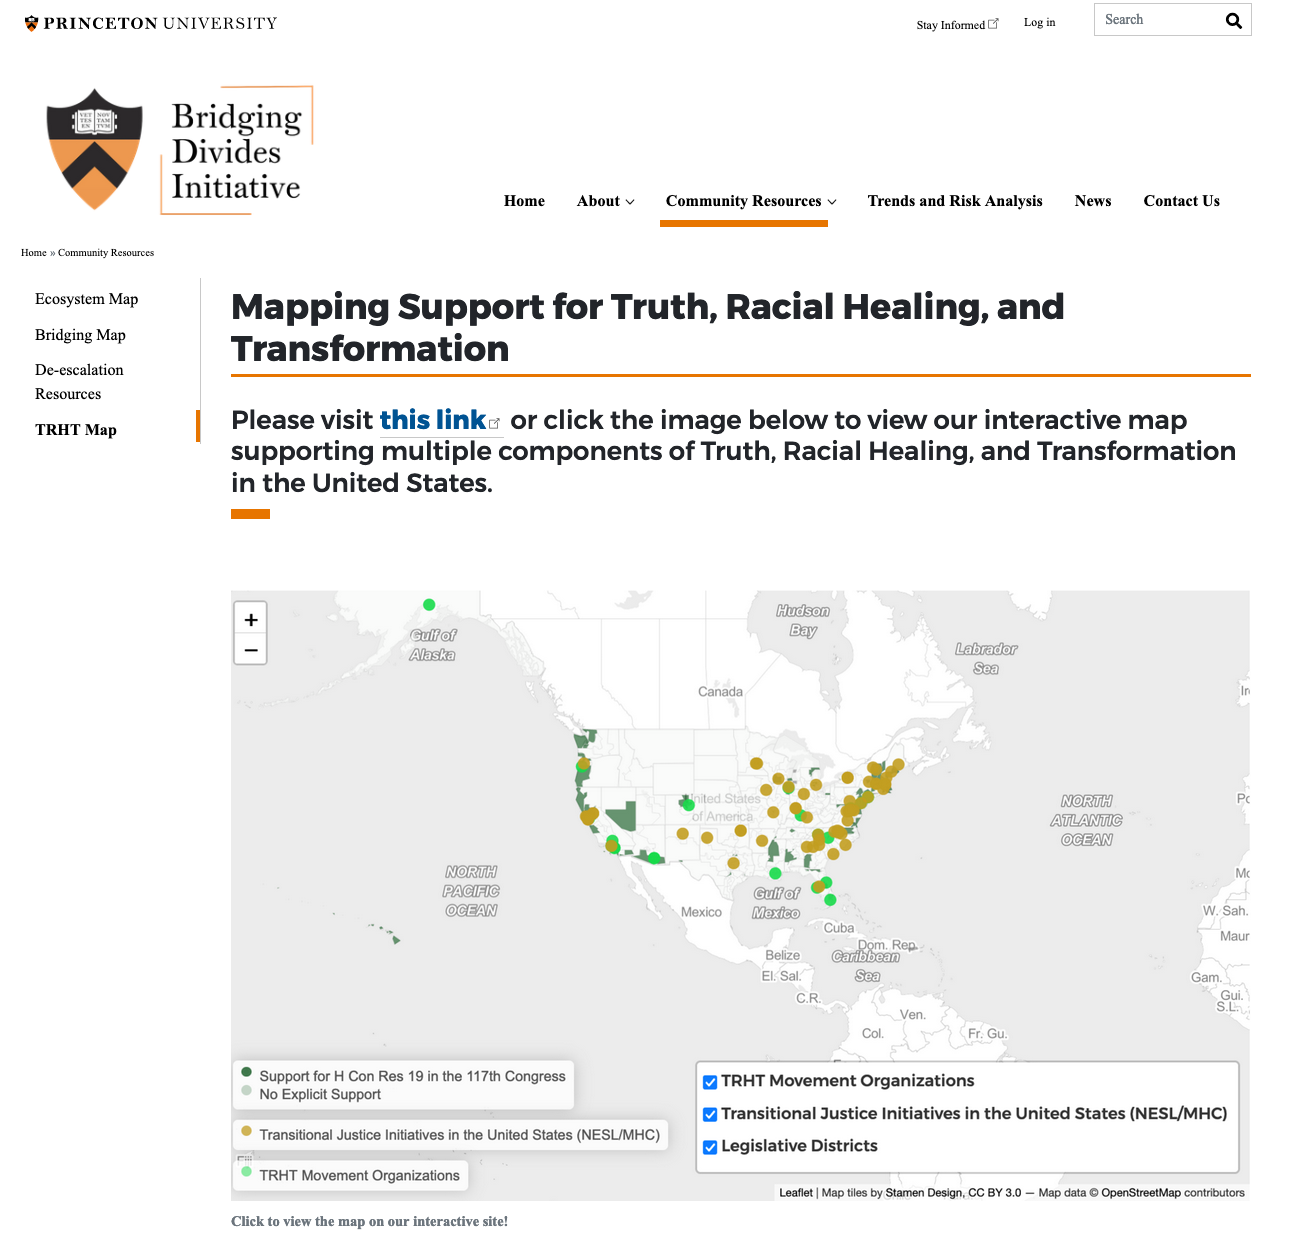 Bridging Digital Divides Initiative (Princeton University) Releases “New Interactive Map Supporting U.S. Truth, Racial Healing, and Transformation Movement”